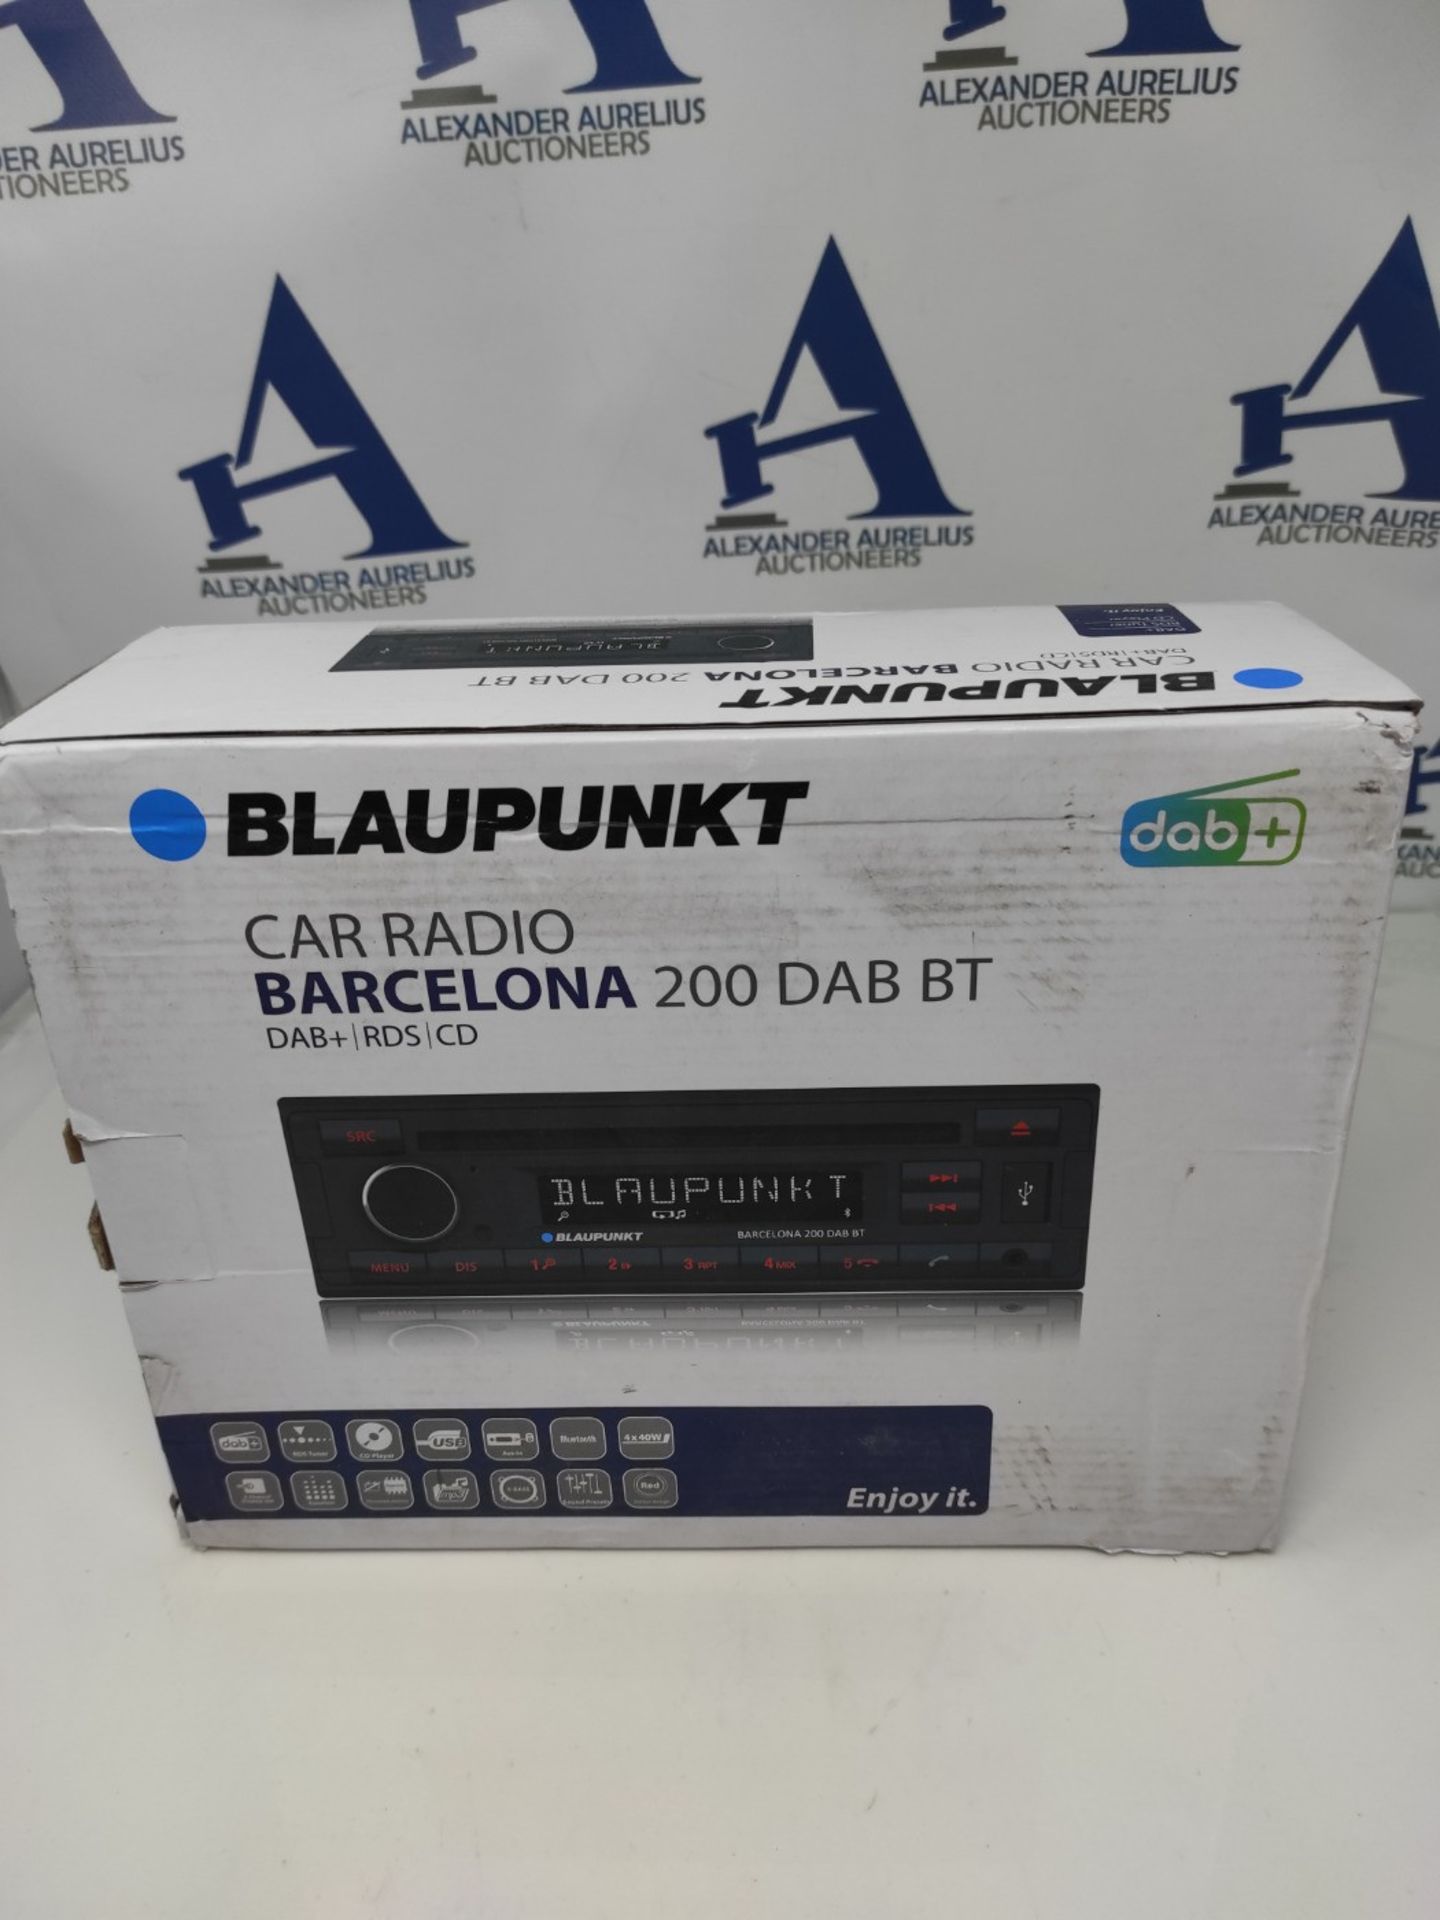 RRP £140.00 Blaupunkt Barcelona 200 DAB BT Car Radio with Bluetooth Hands-Free Calling, DAB+ Tuner - Image 2 of 3